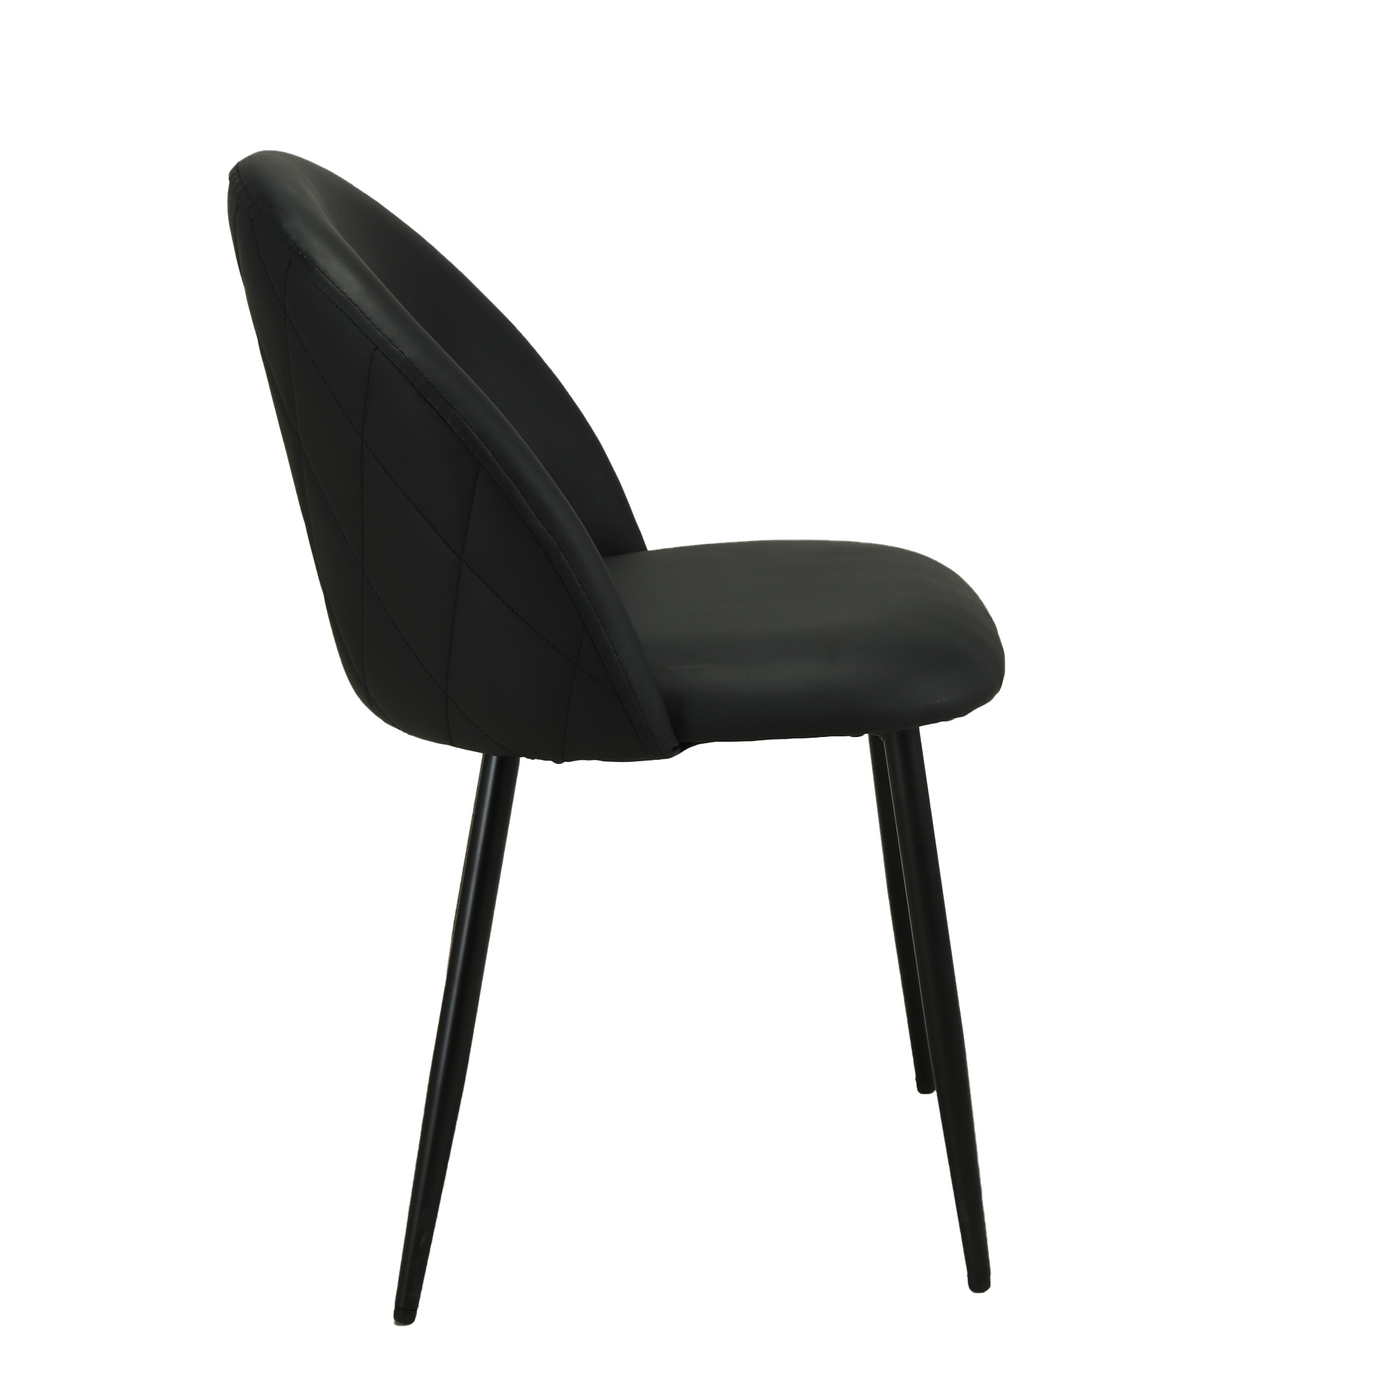 Charles Black Leather Dining Chairs